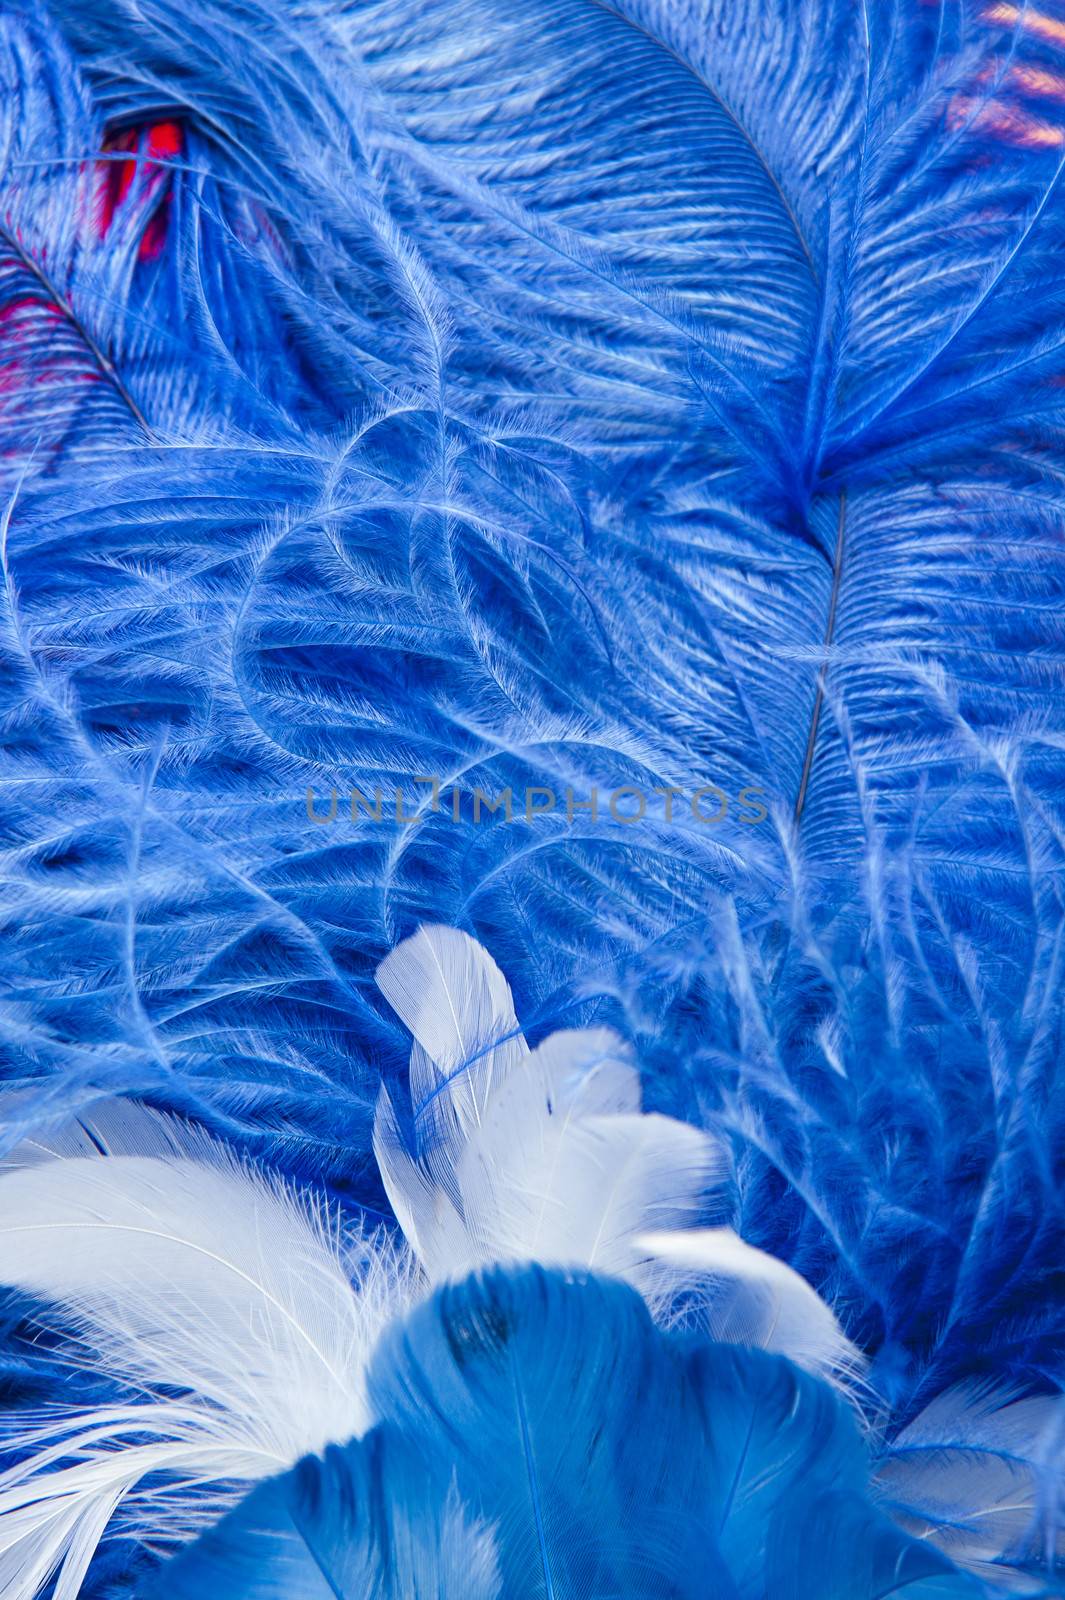 Blue elegant feathers make a texture for your backgrounds